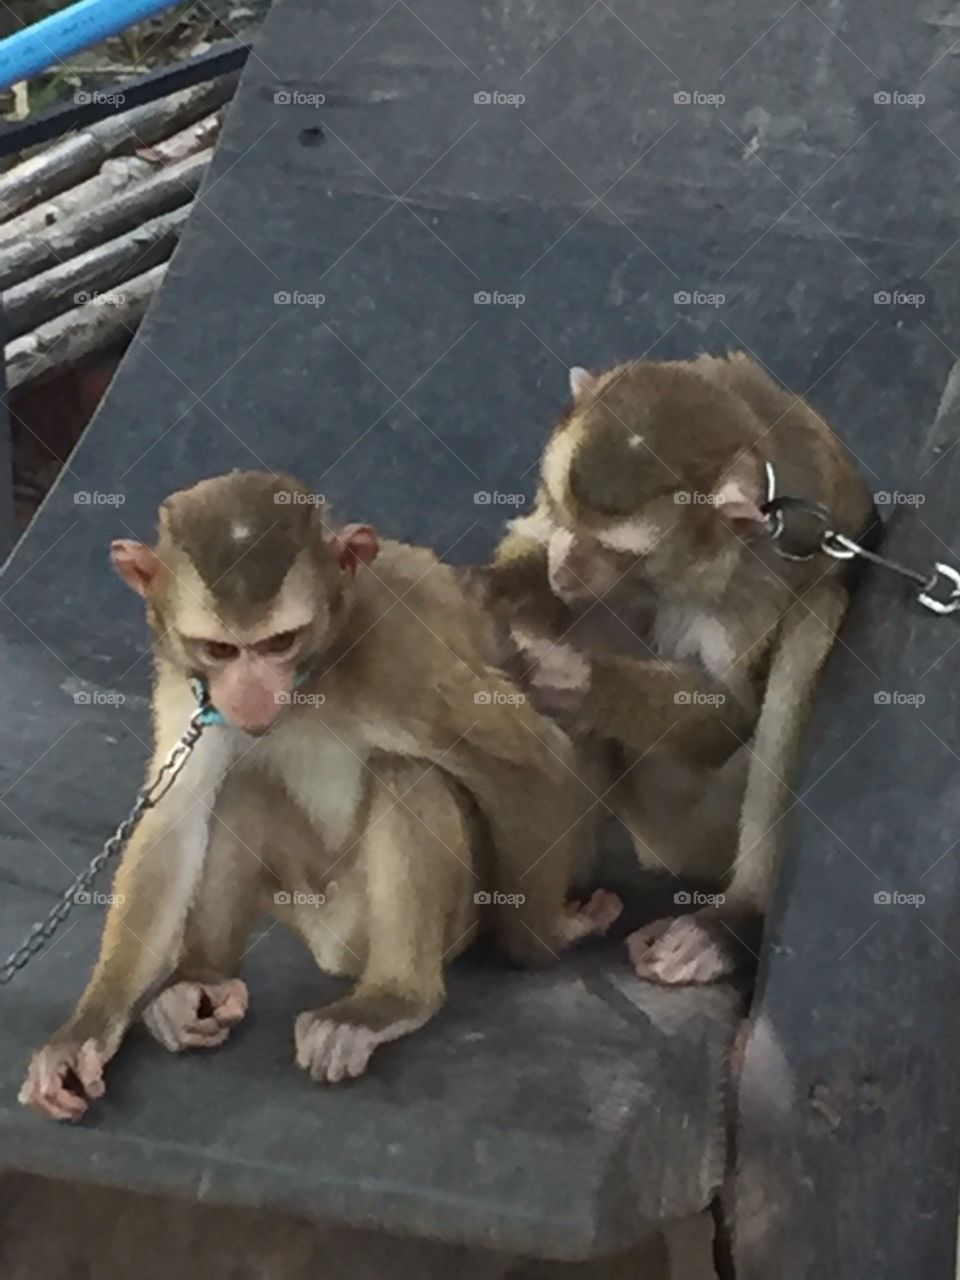 Monkey cleaning his buddy